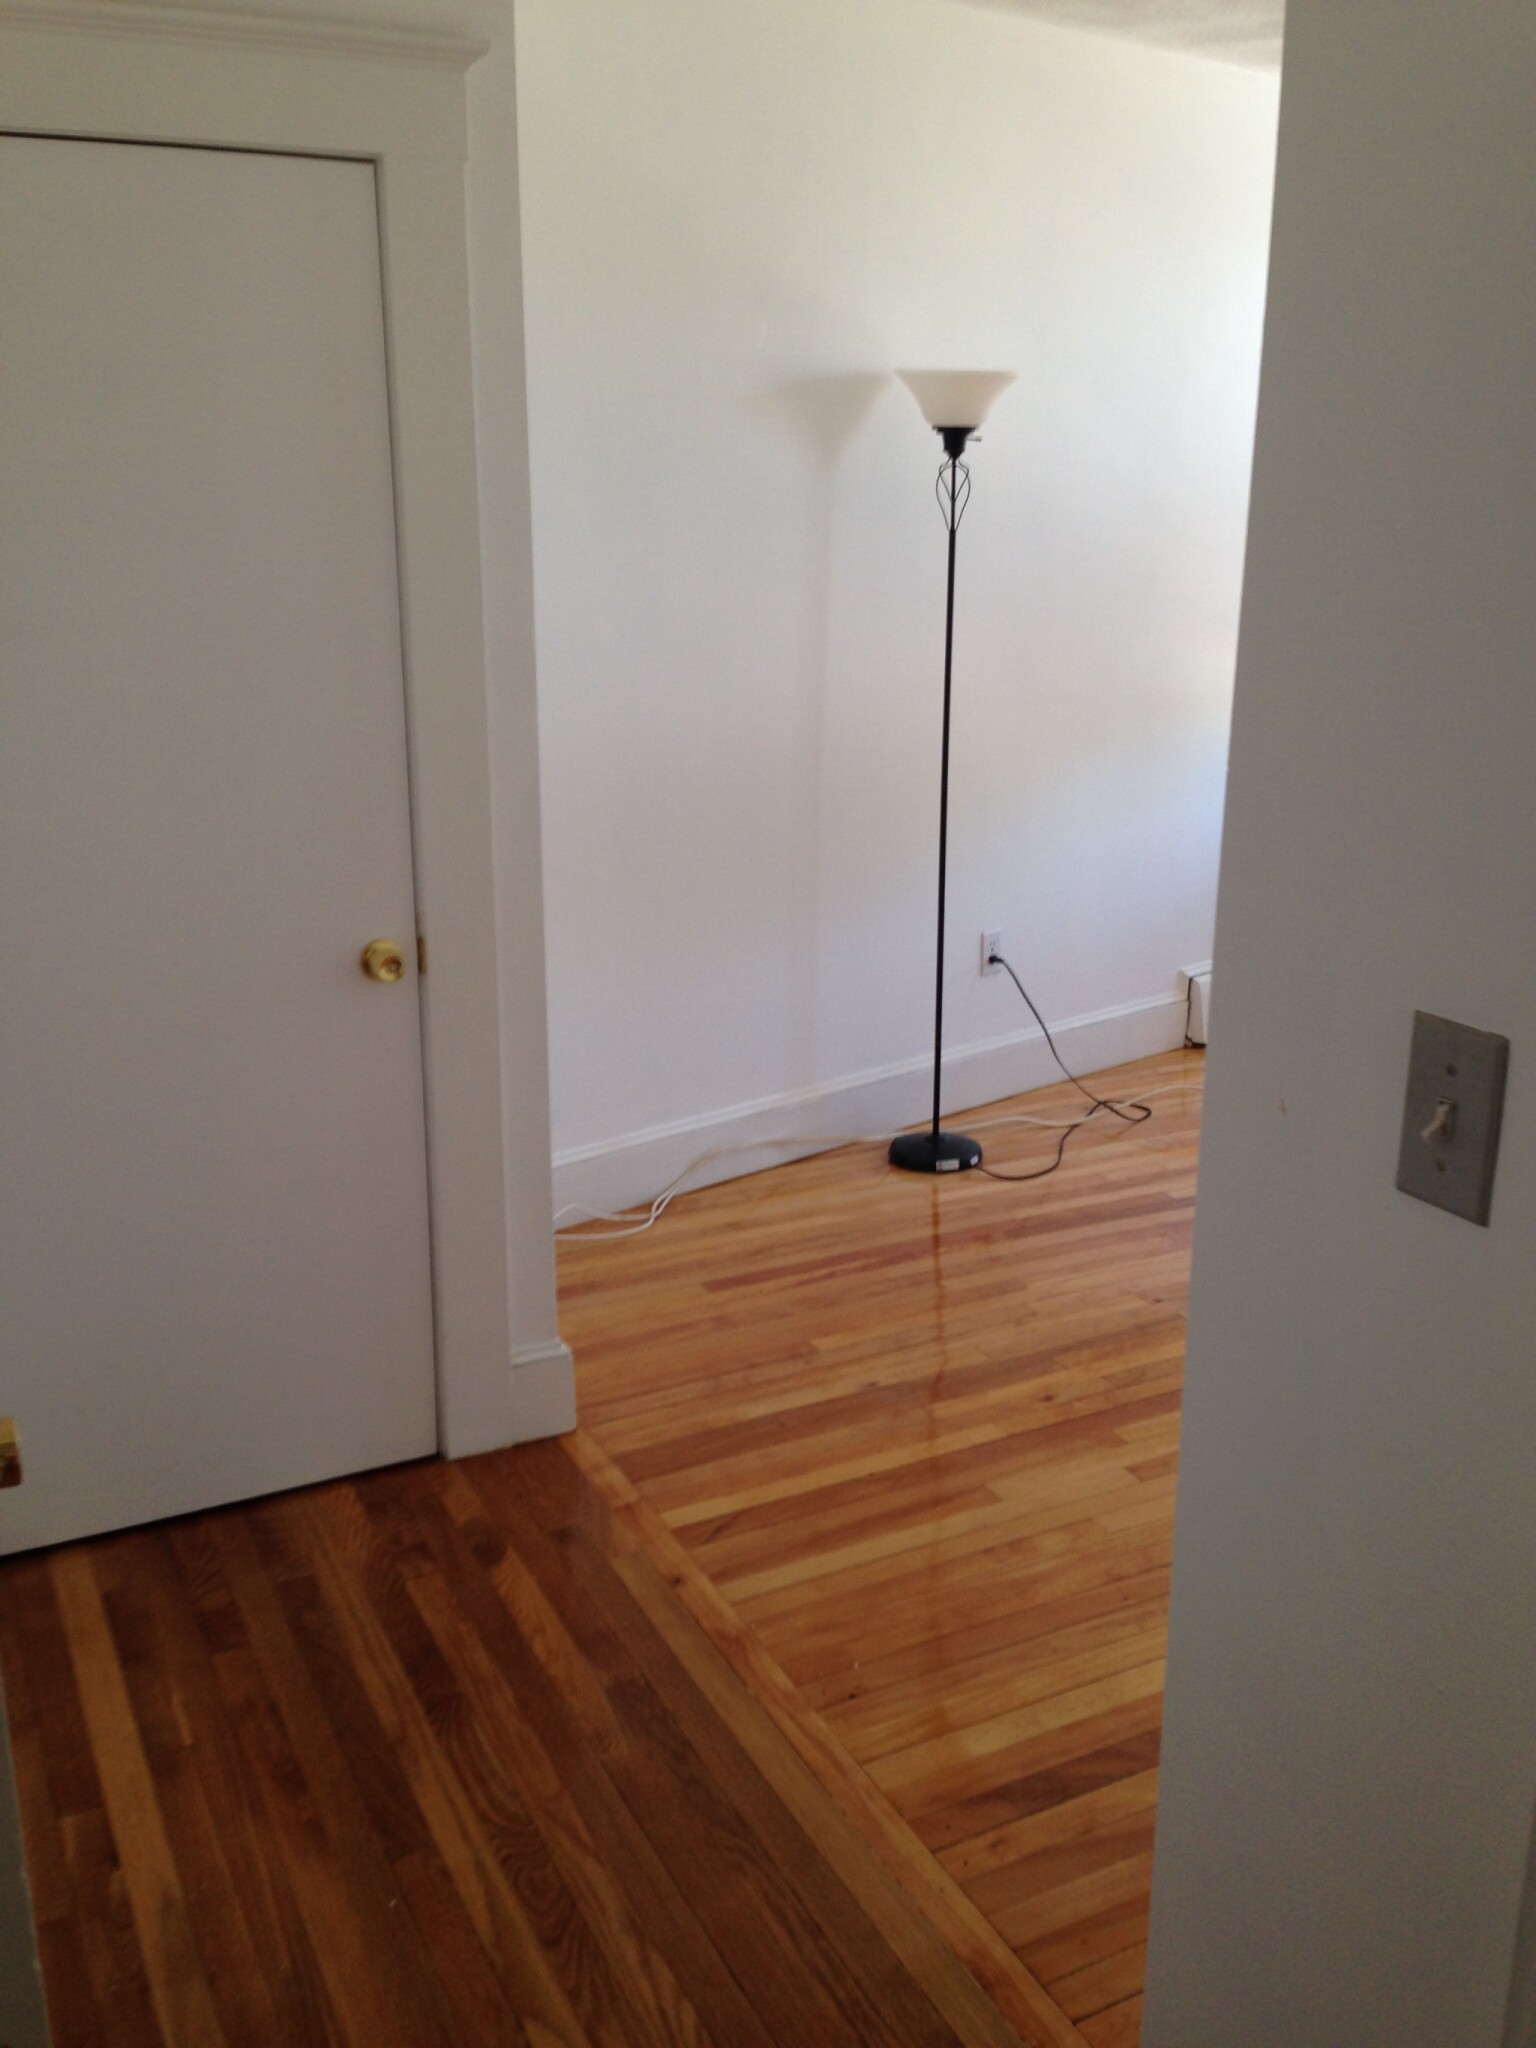 Photos of apartment on Camelot Ct.,Boston MA 02135